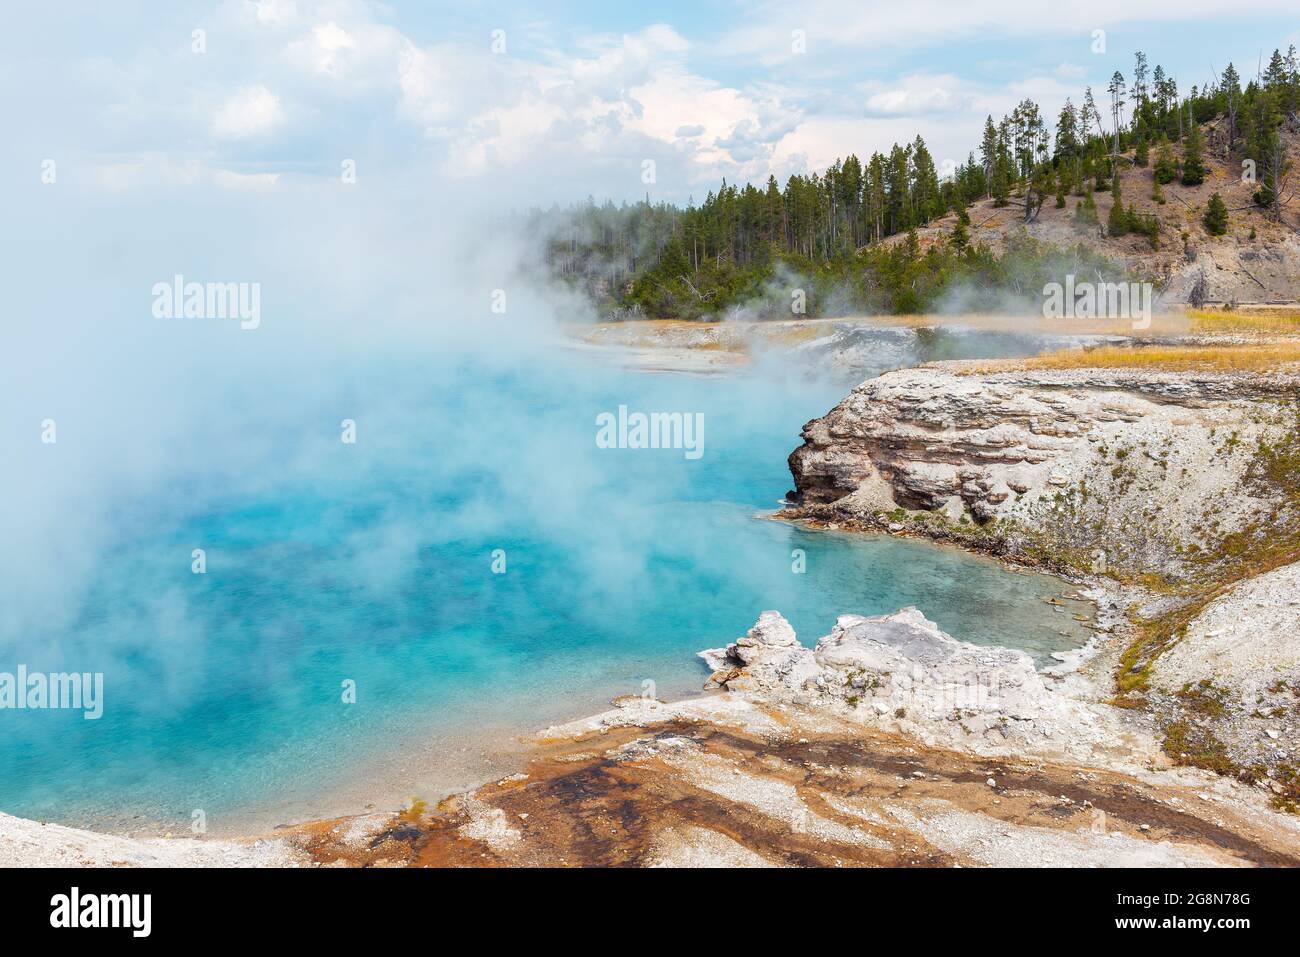 Excelsior Geyser, Midway Geyser Basin, parc national de Yellowstone, Wyoming, États-Unis. Banque D'Images